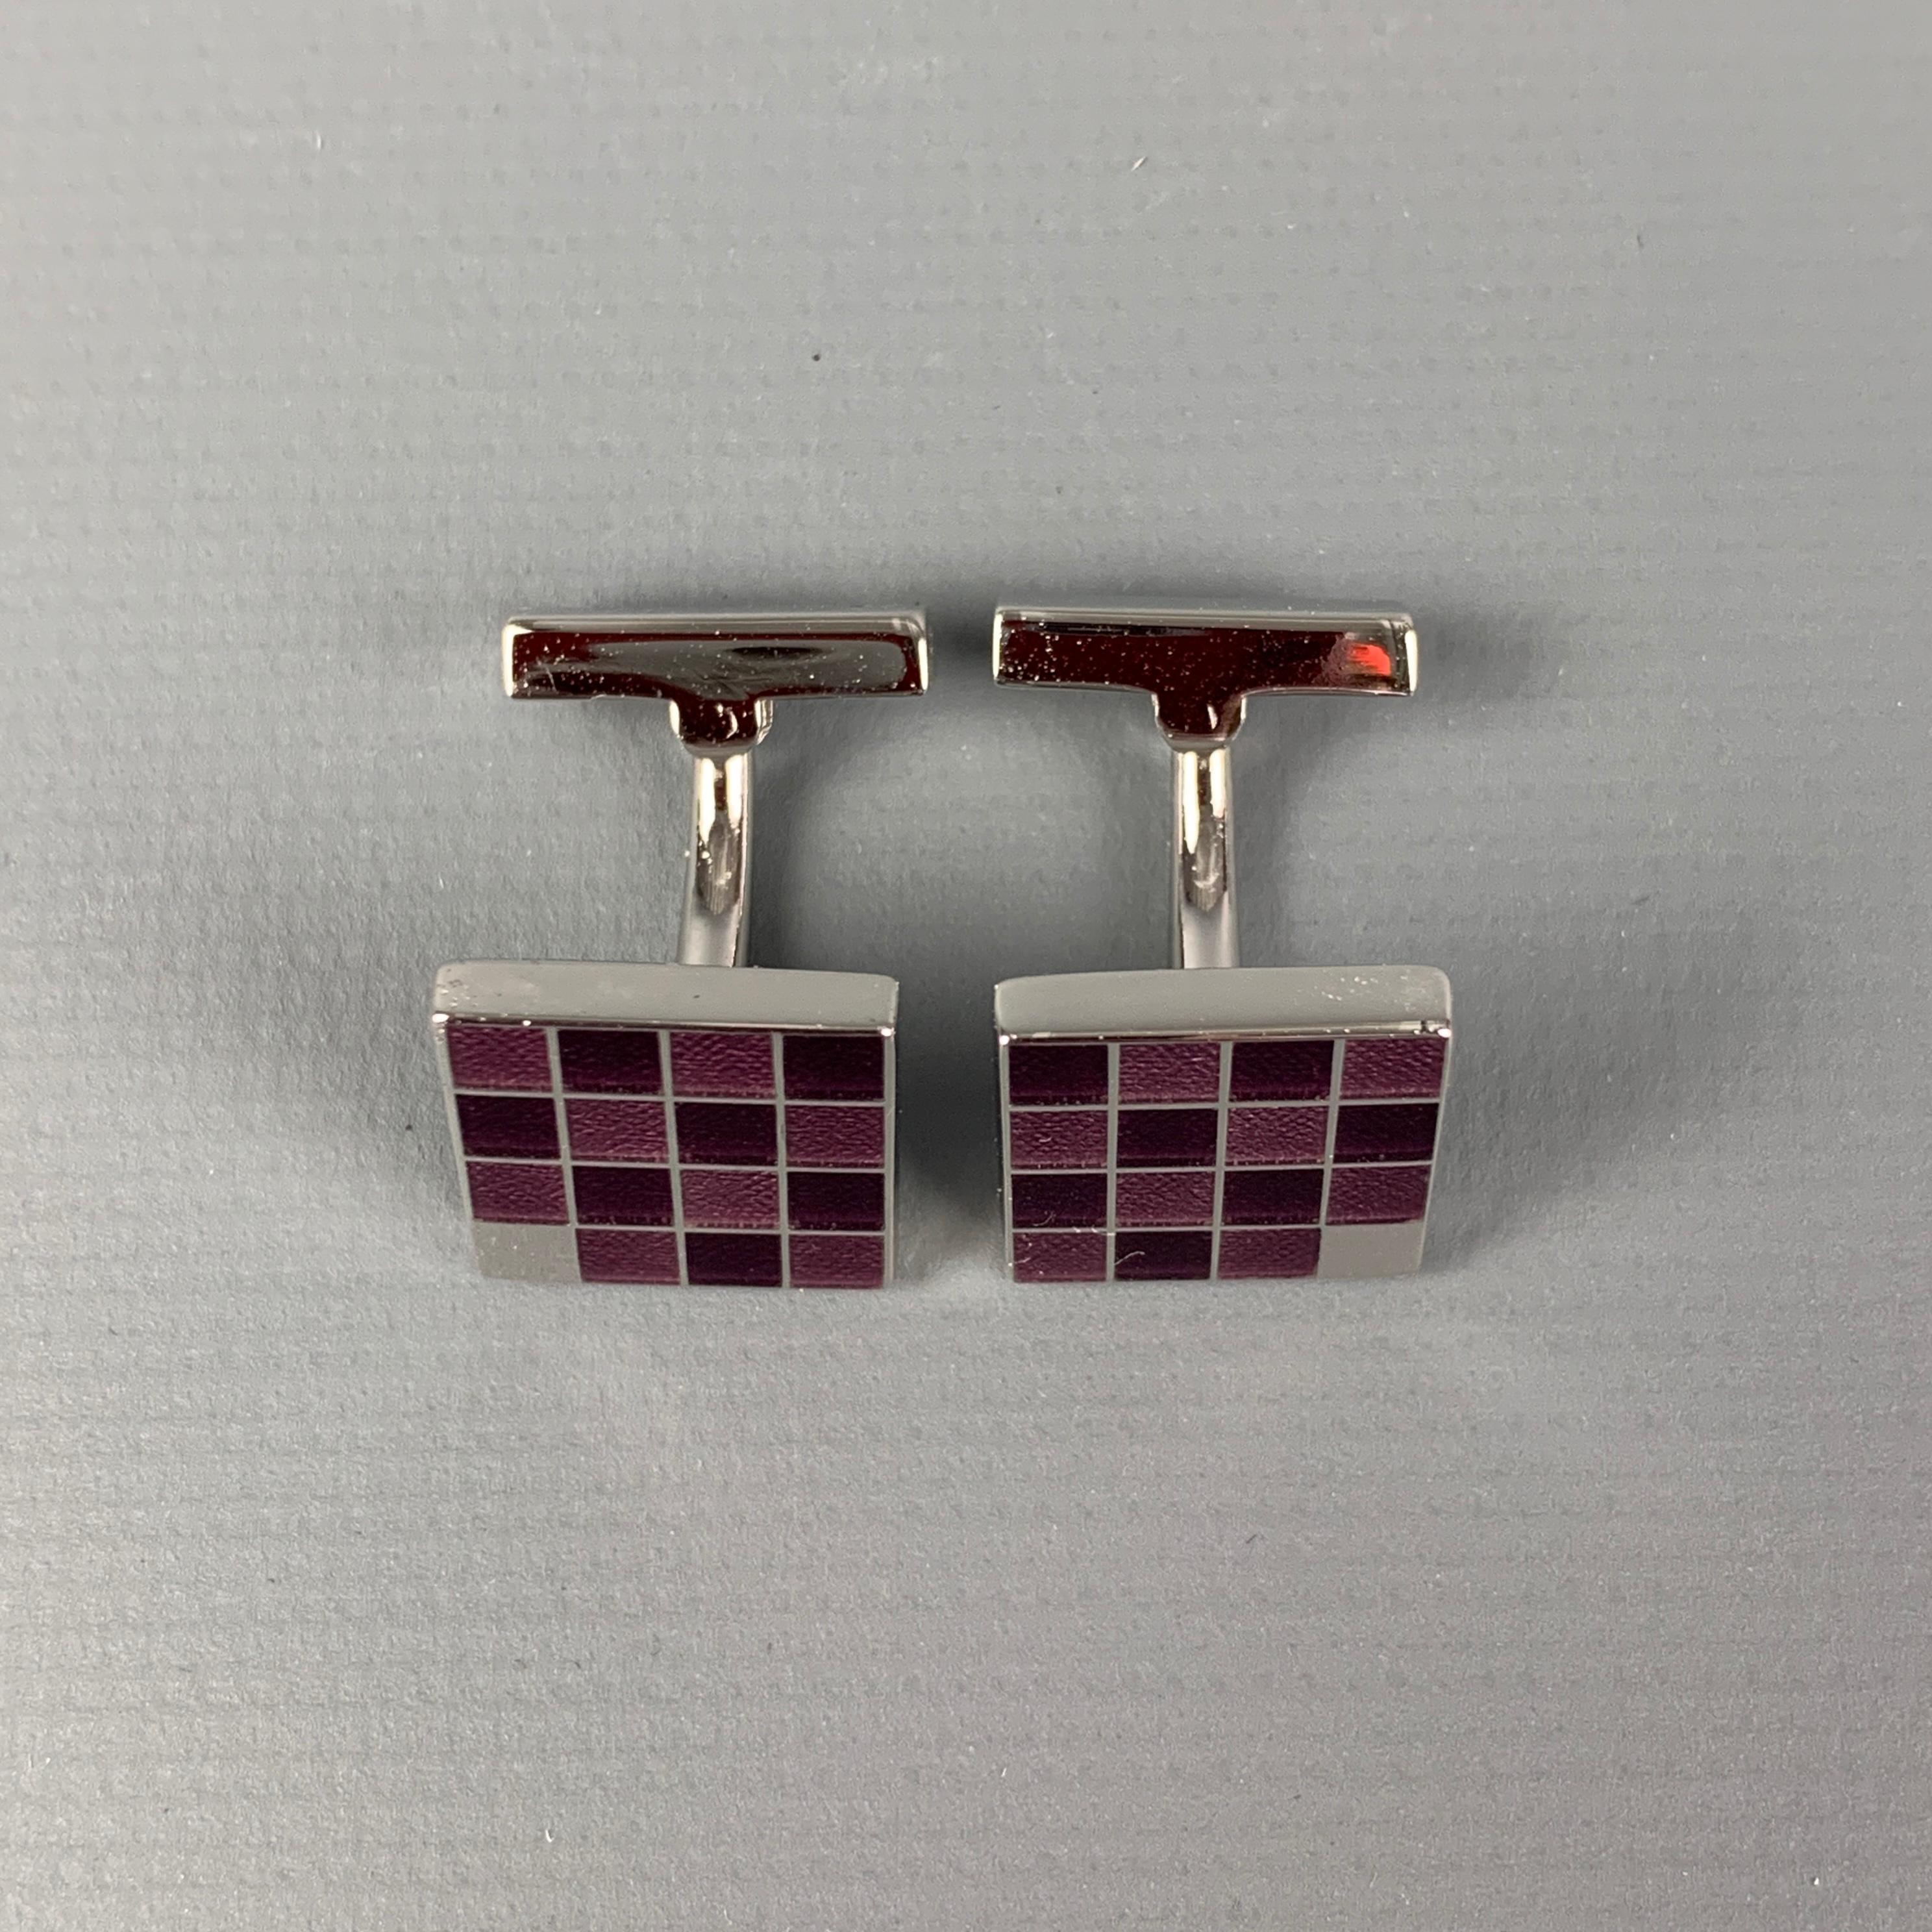 LOUIS VUITTON cuff links comes in a burgundy damier checkered sterling silver featuring a square design. Includes case. Made in France. 

Excellent Pre-Owned Condition.
